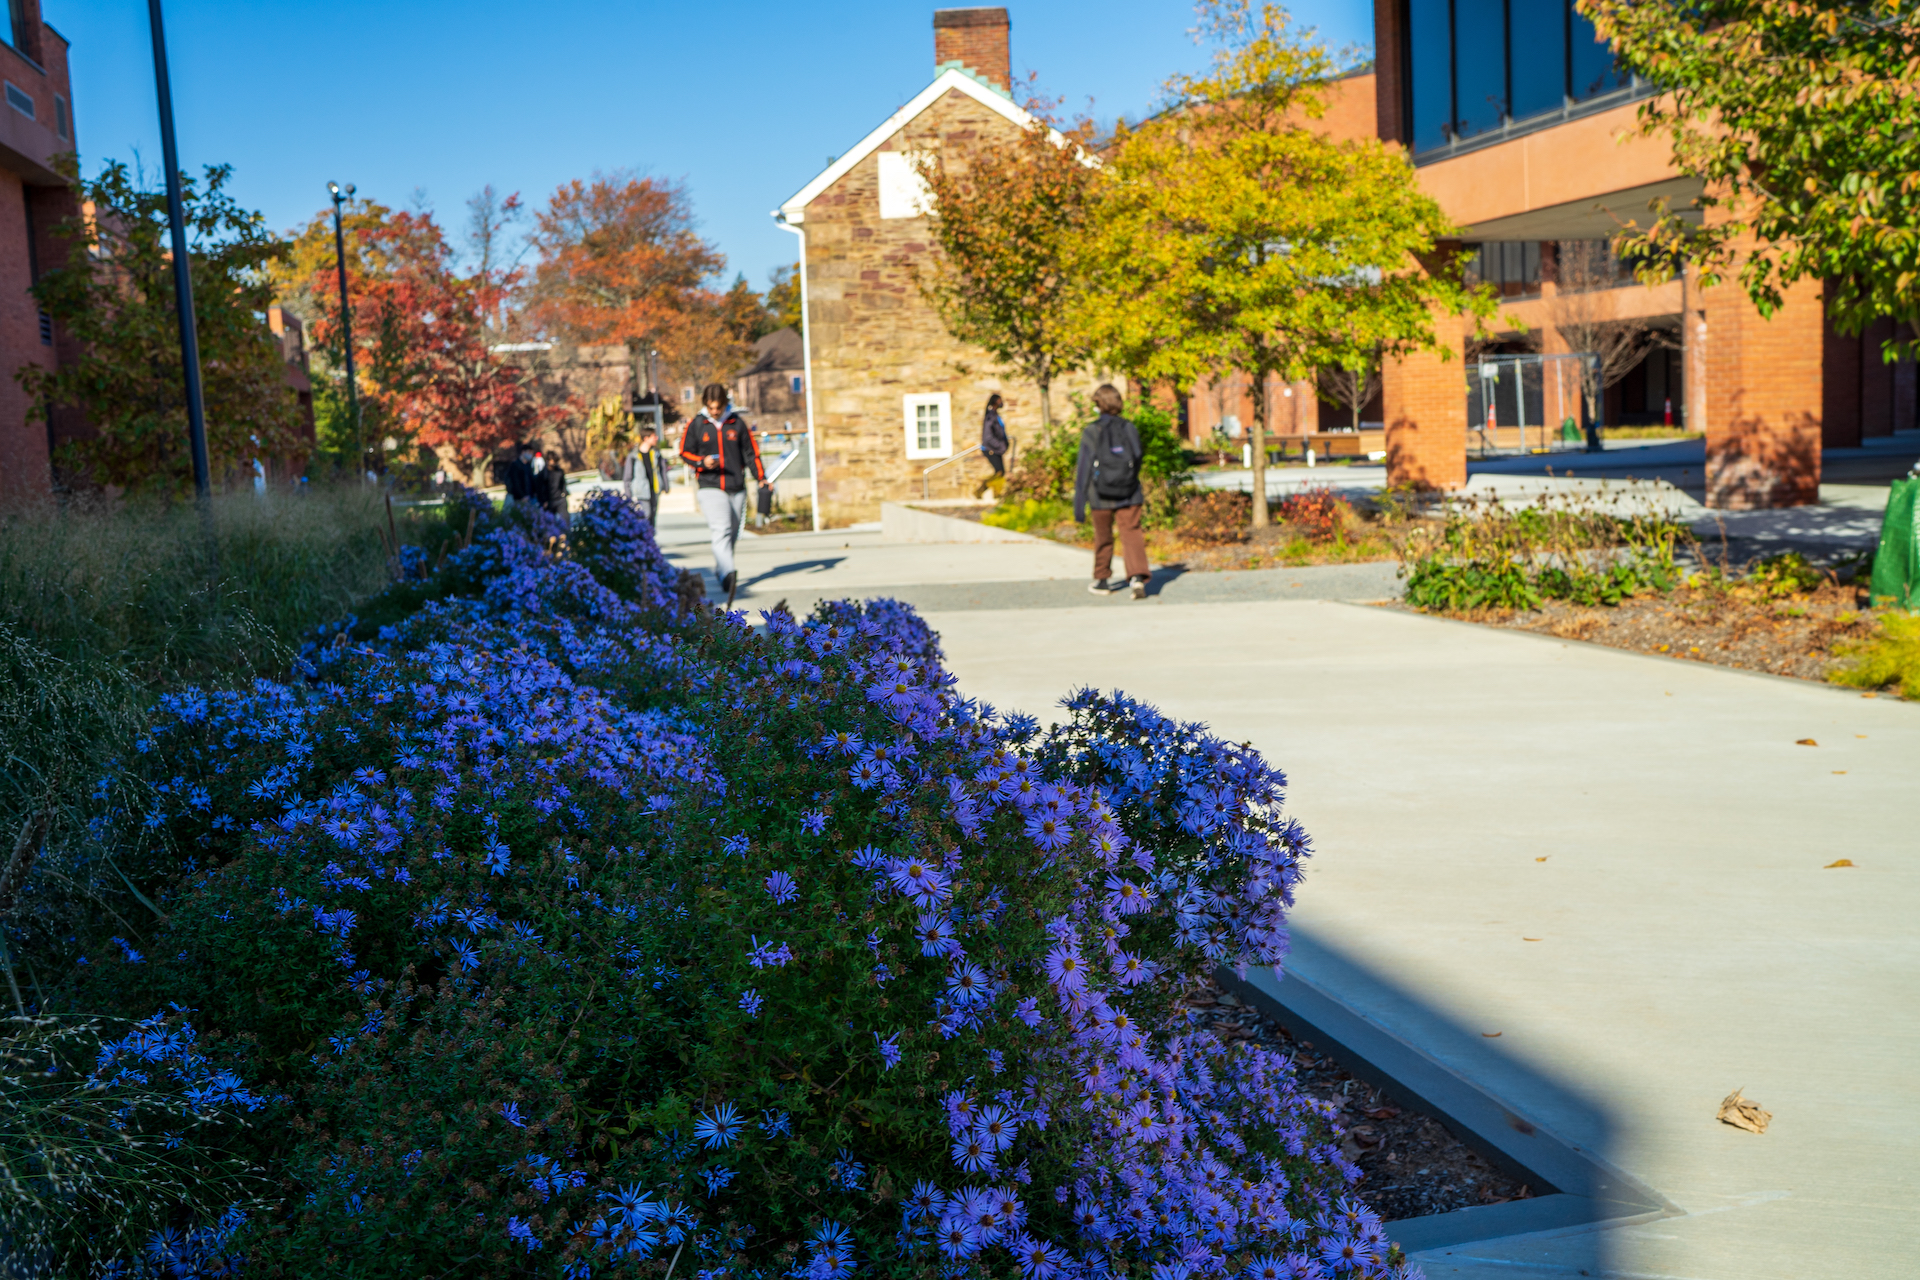 students walking on campus on a sunny day